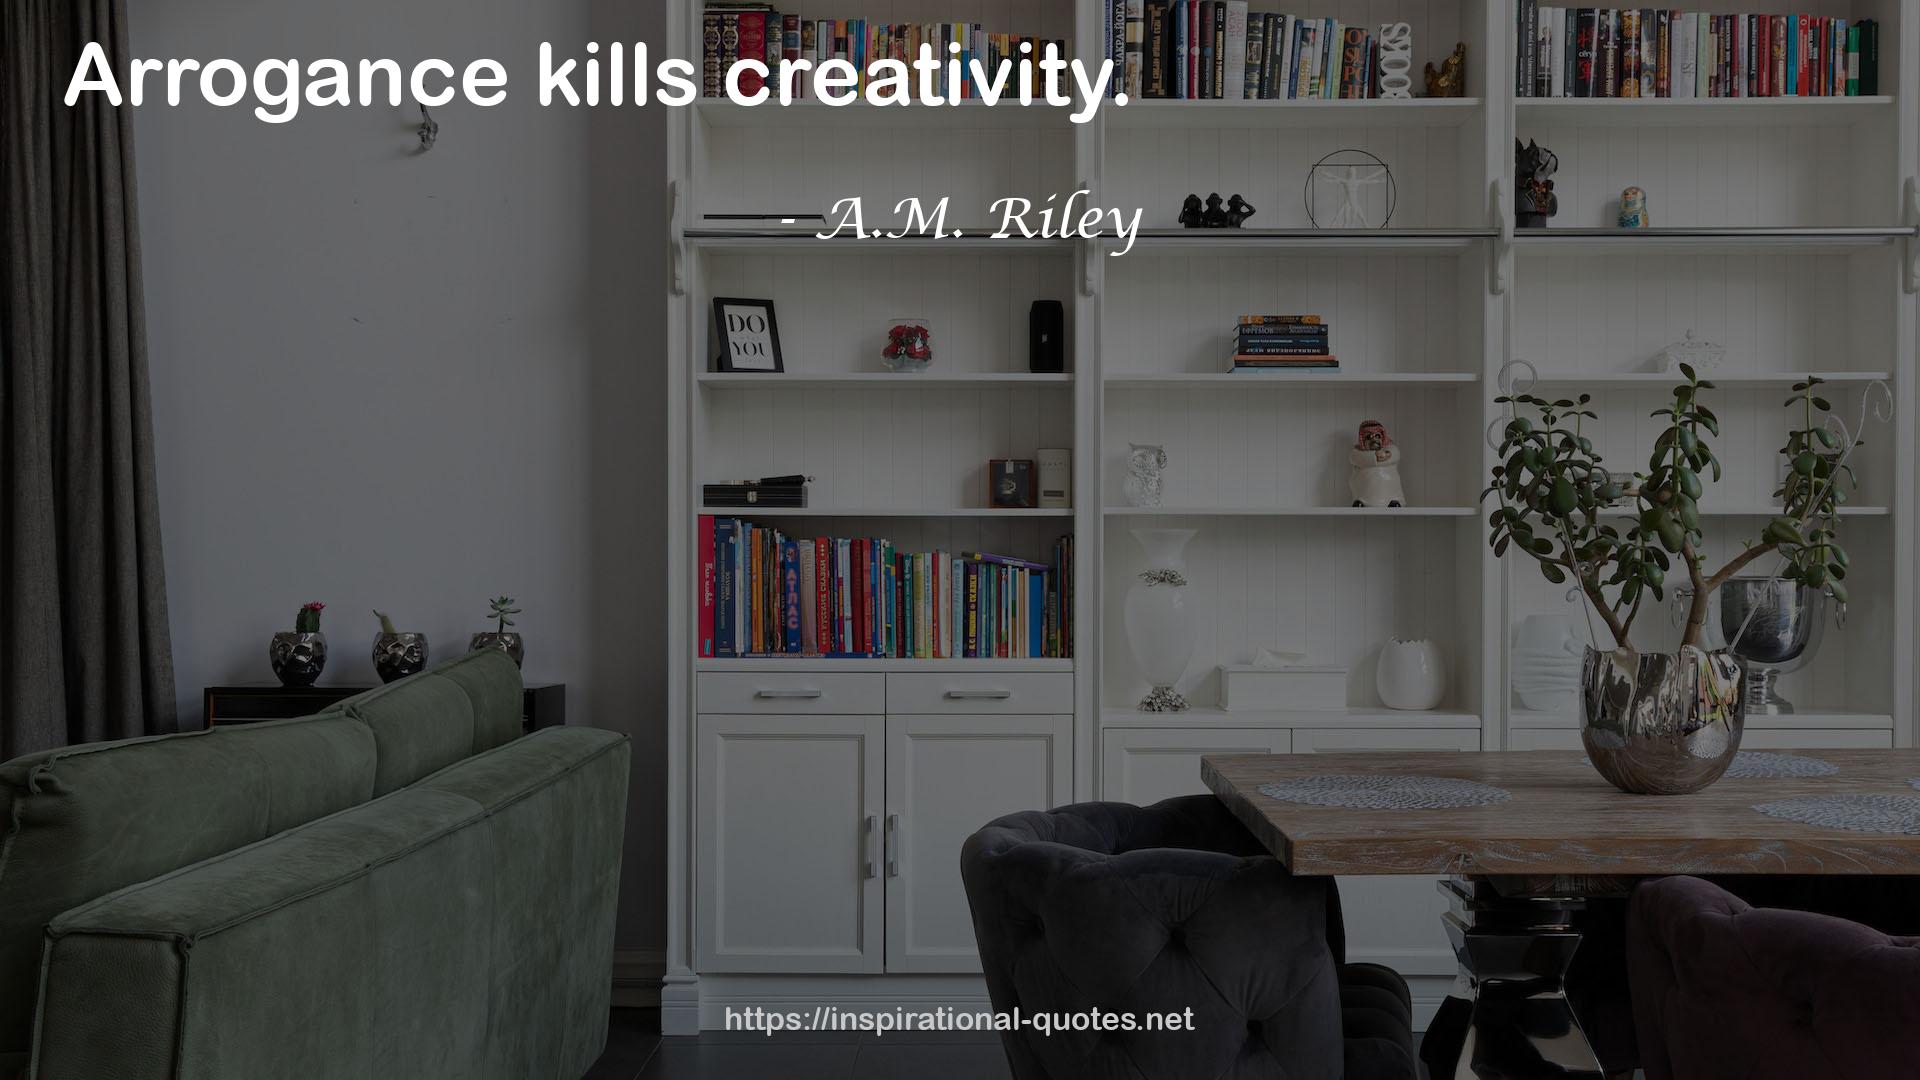 A.M. Riley QUOTES